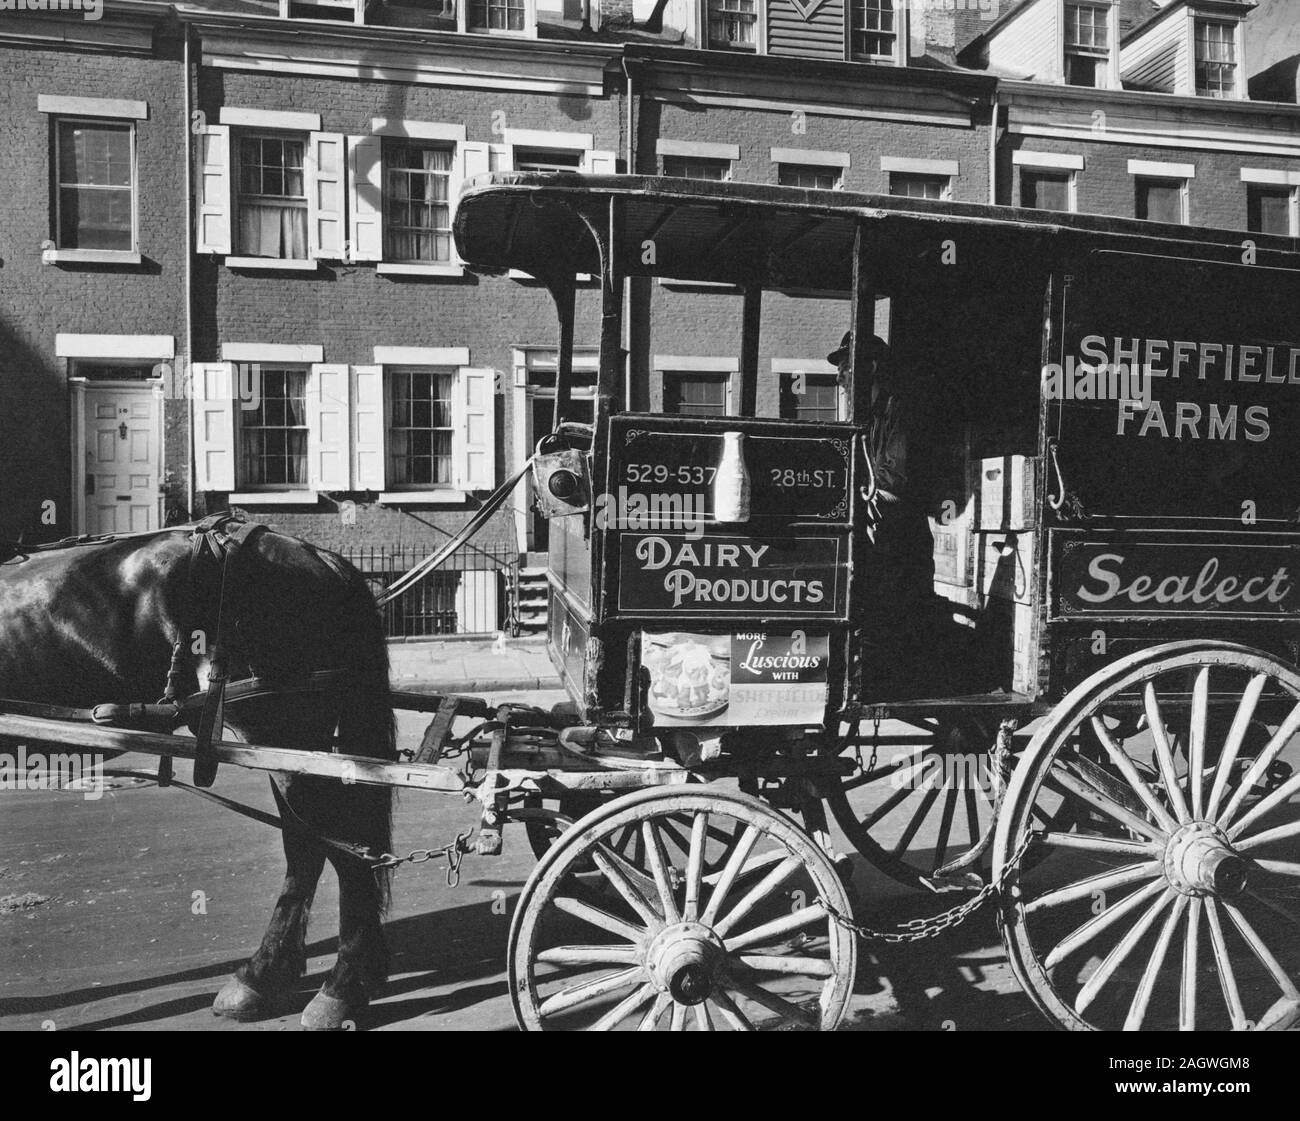 Sheffield farms milk wagon, delivery man inside, horse only half in frame; row house beyond only partially visible, brick houses with shutters. Stock Photo